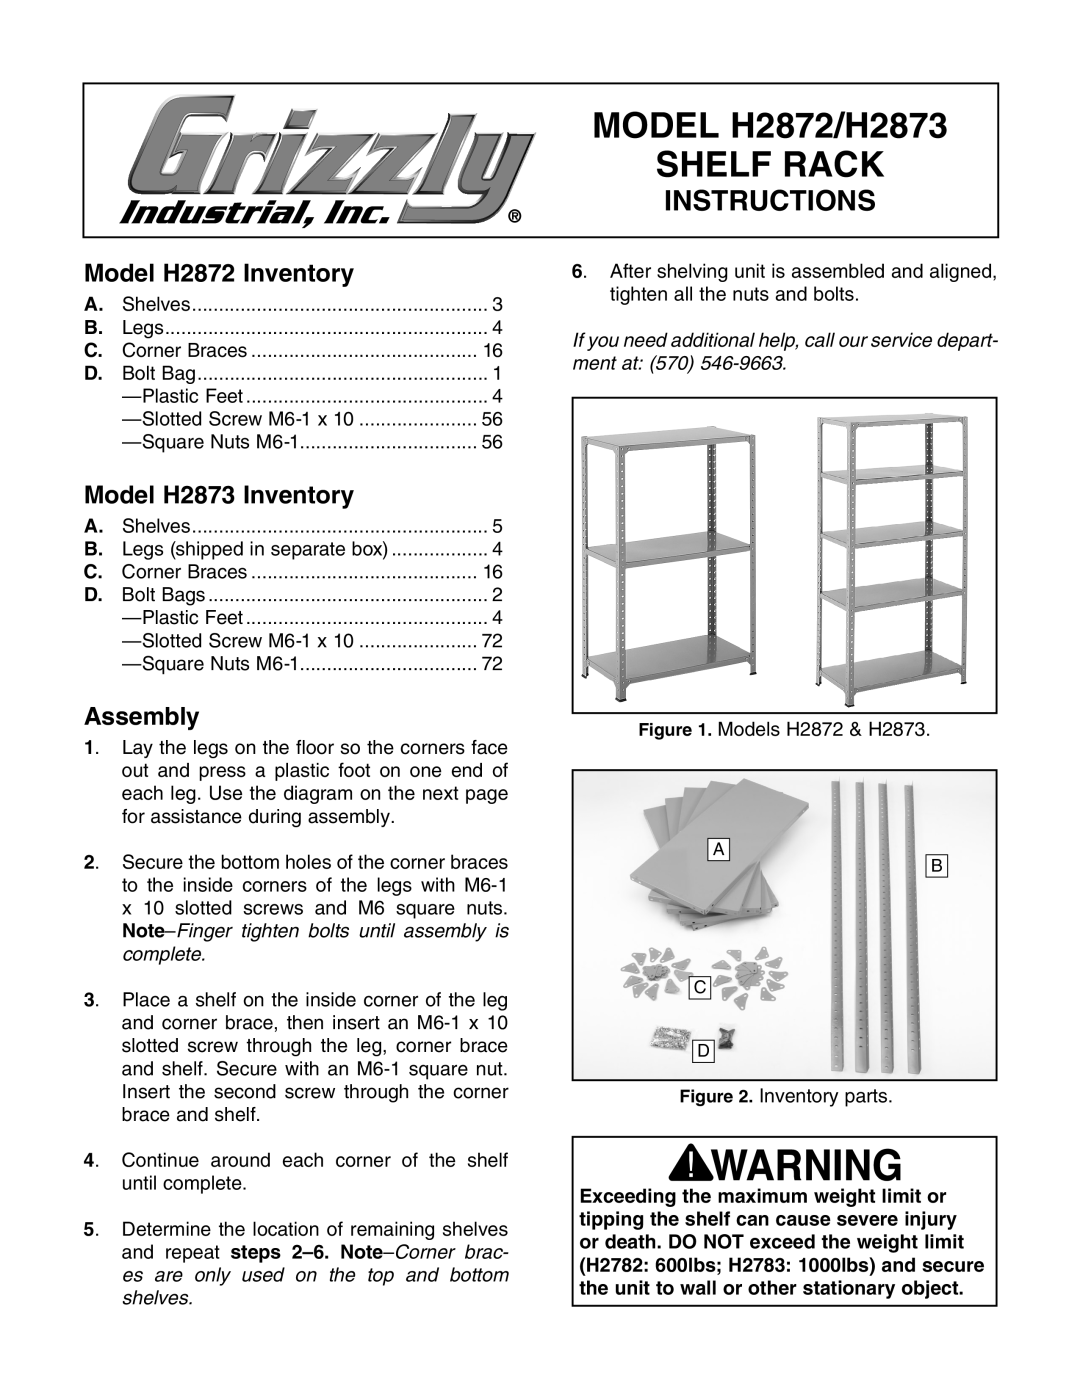 Grizzly manual MODEL H2872/H2873 SHELF RACK, Model H2872 Inventory, Model H2873 Inventory, Assembly, Instructions 